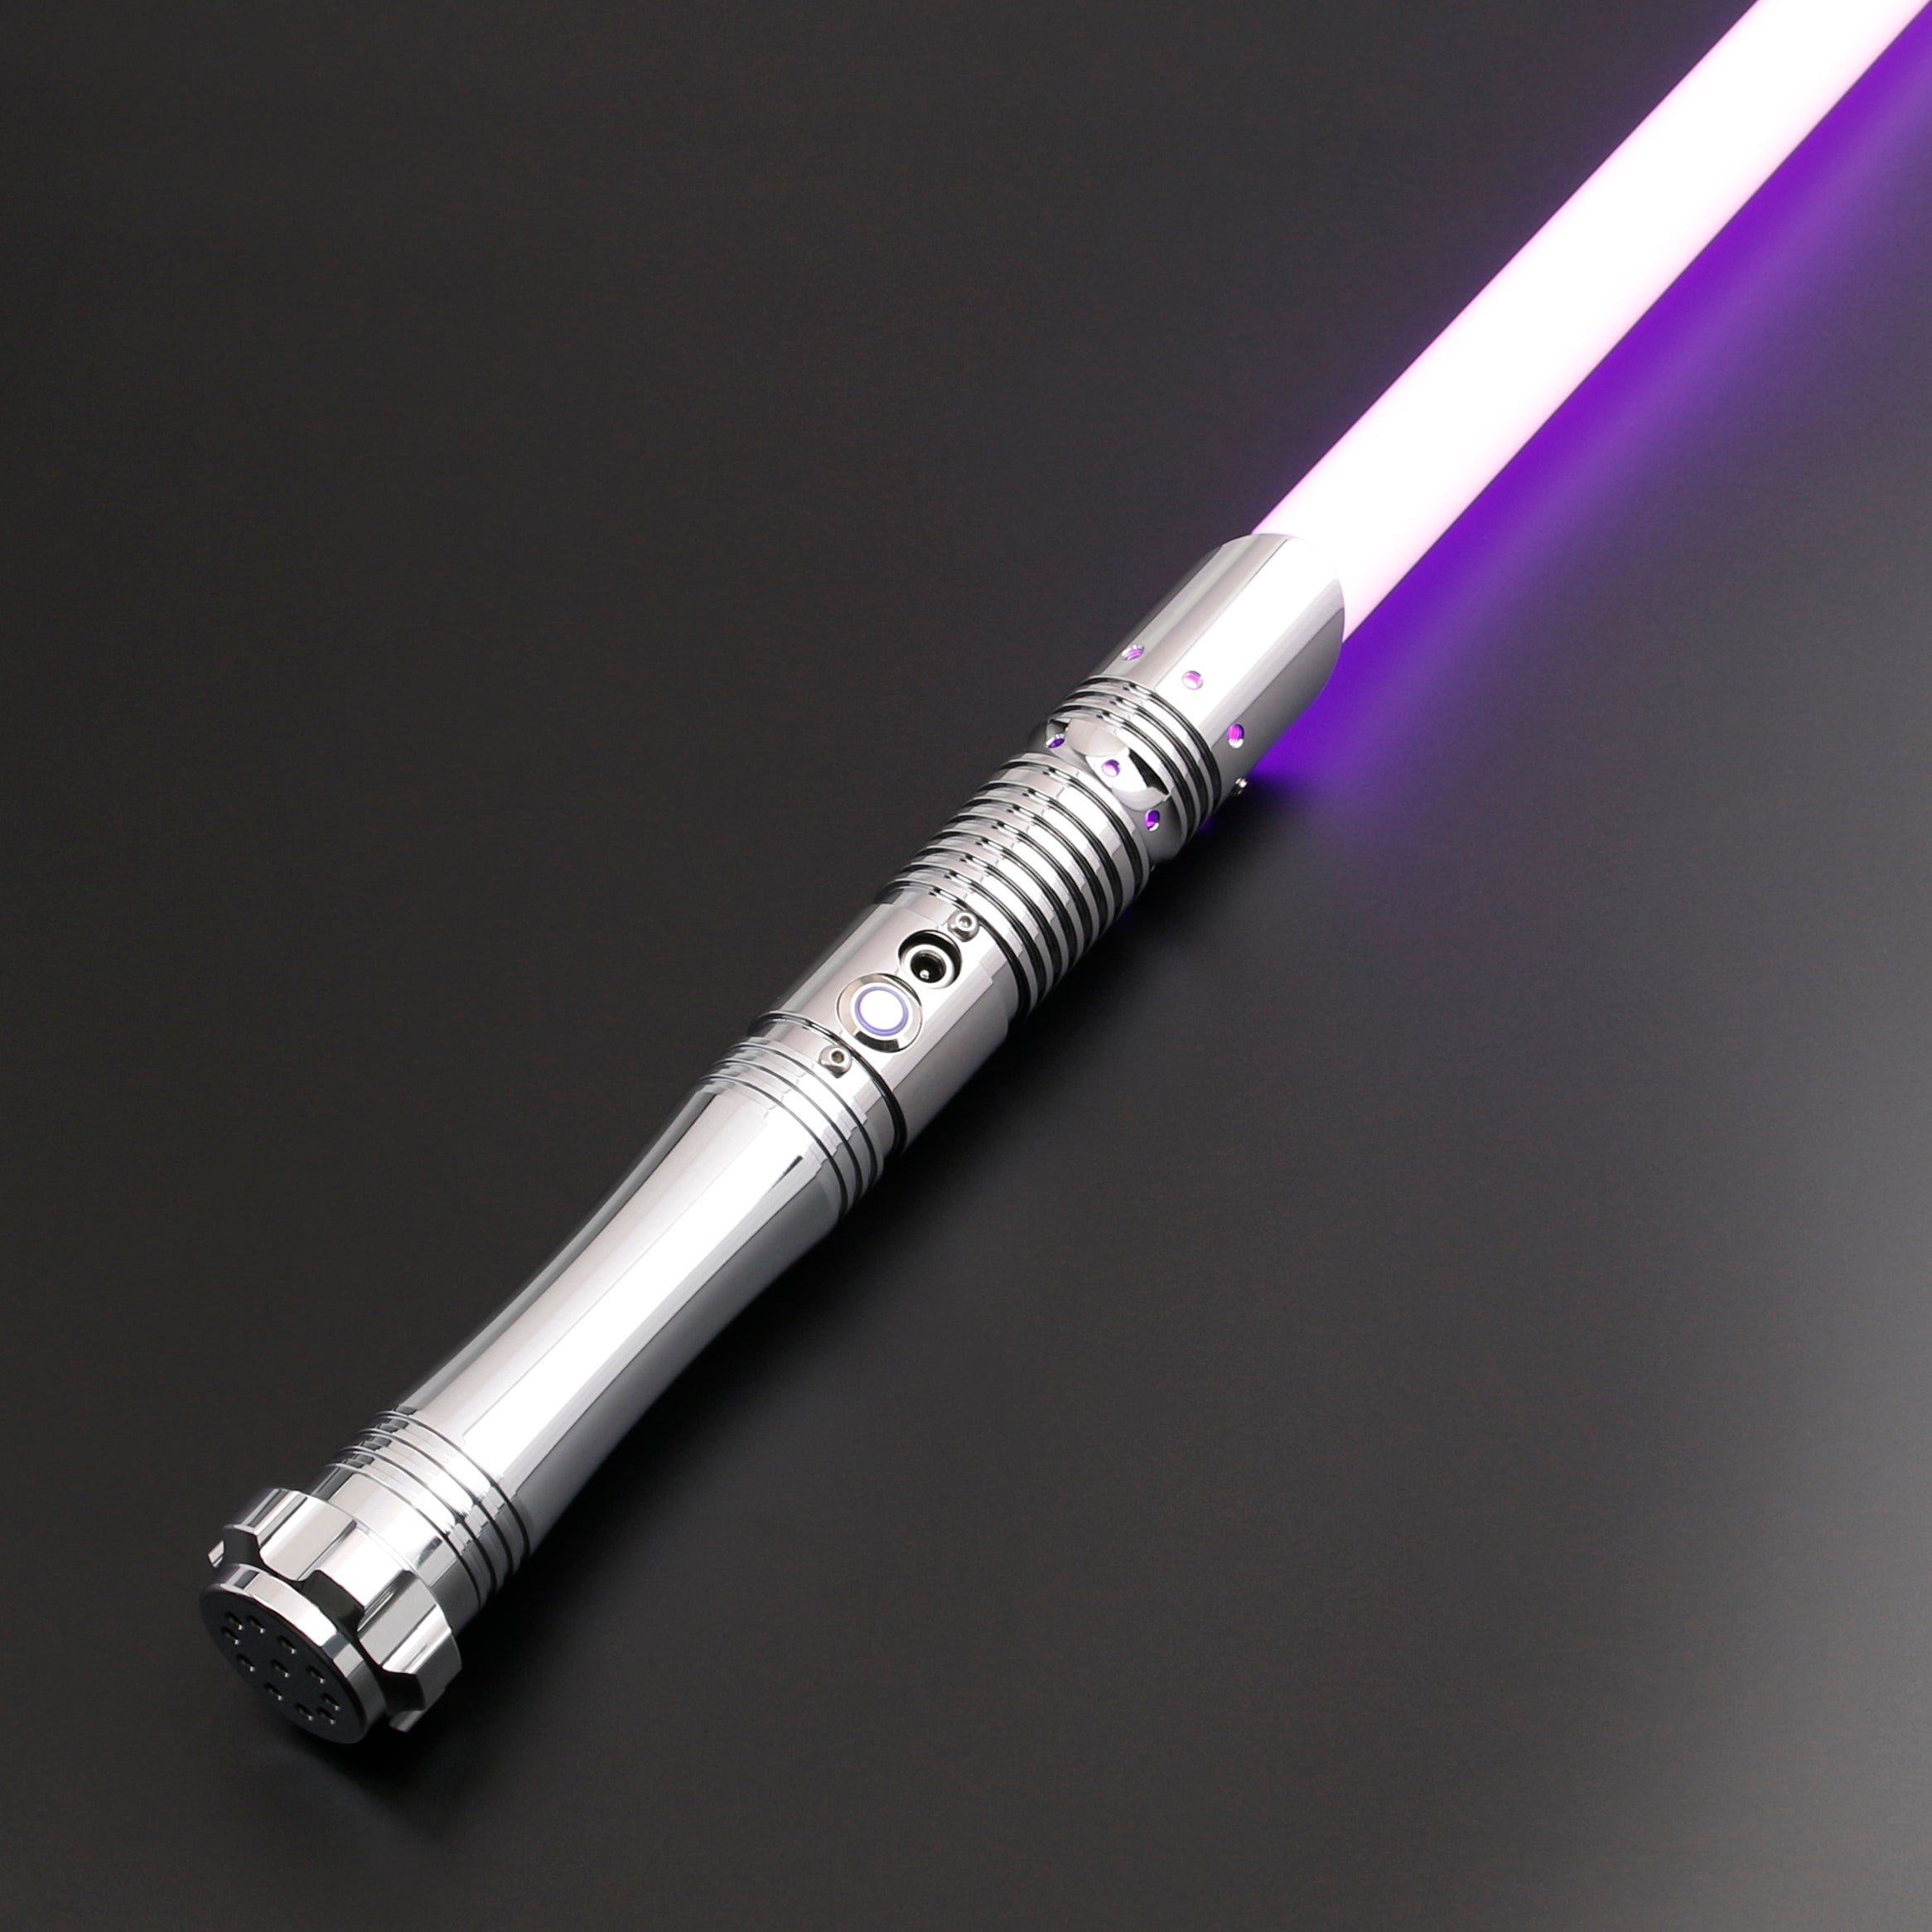 The Royal - Neopixel Lightsaber w/ Blade - Lightsaber Collection